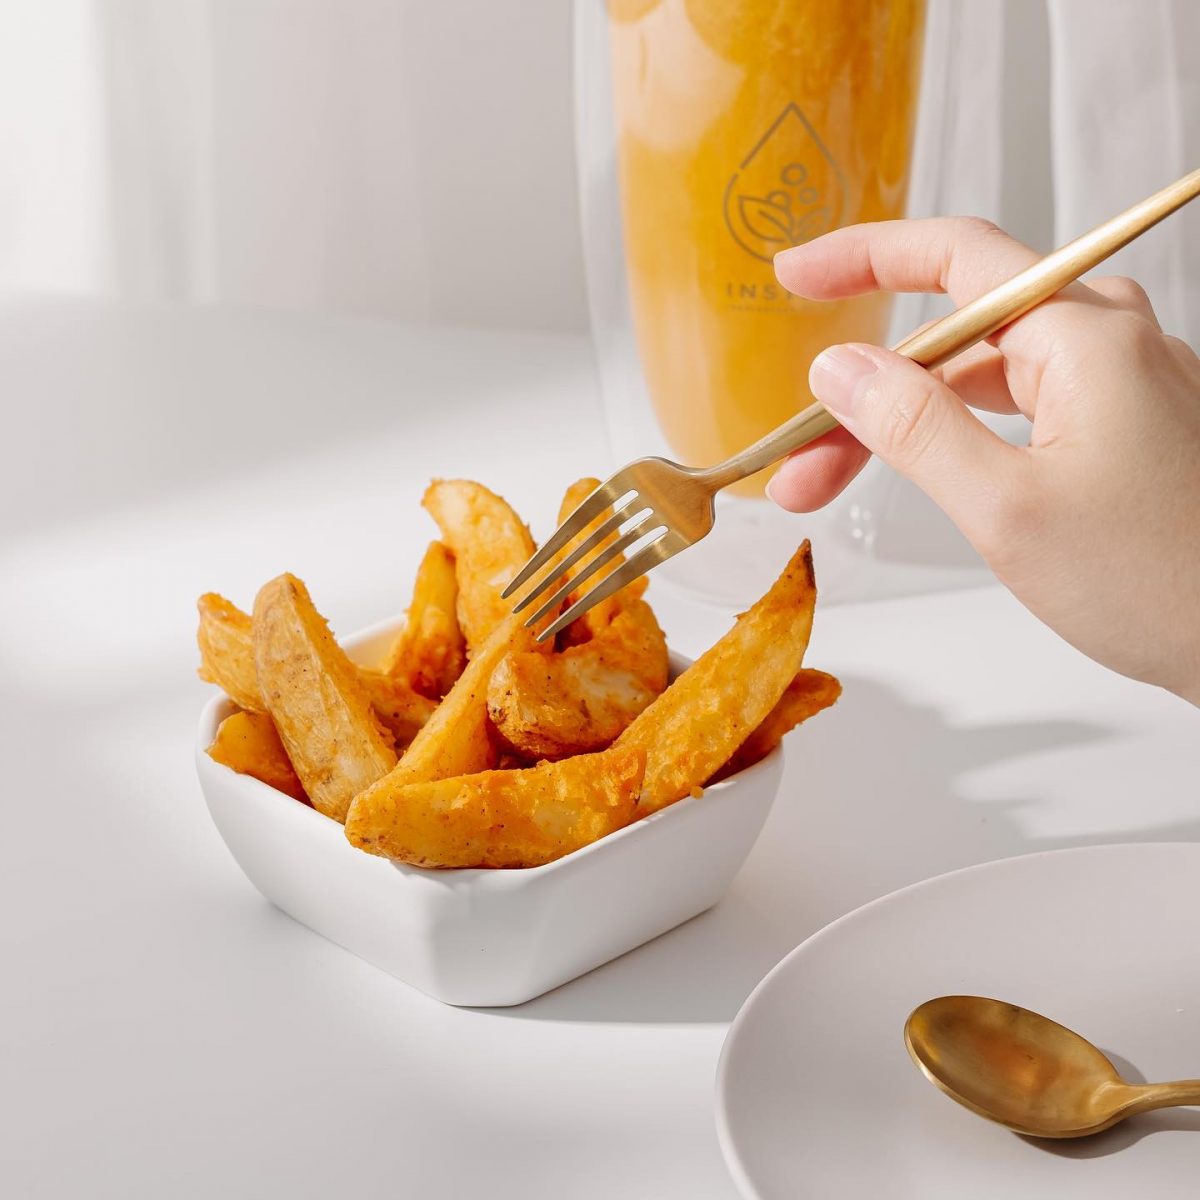 Craving for a side? Try some delicious wedges with your drink!